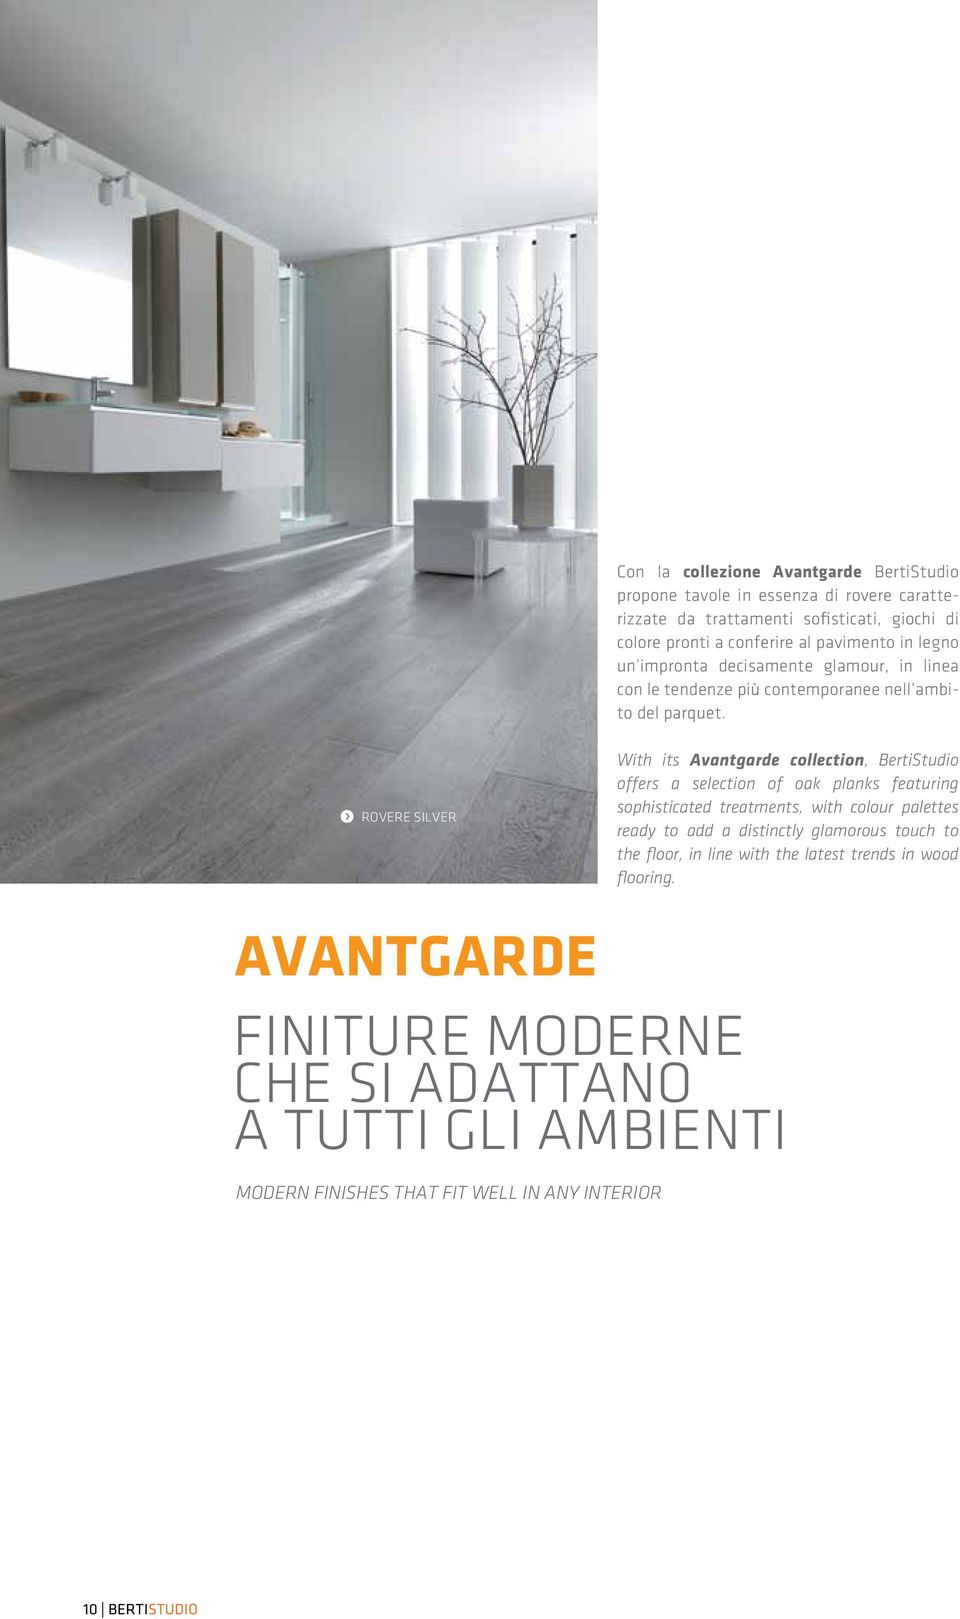 Rovere silver With its Avantgarde collection, BertiStudio offers a selection of oak planks featuring sophisticated treatments, with colour palettes ready to add a